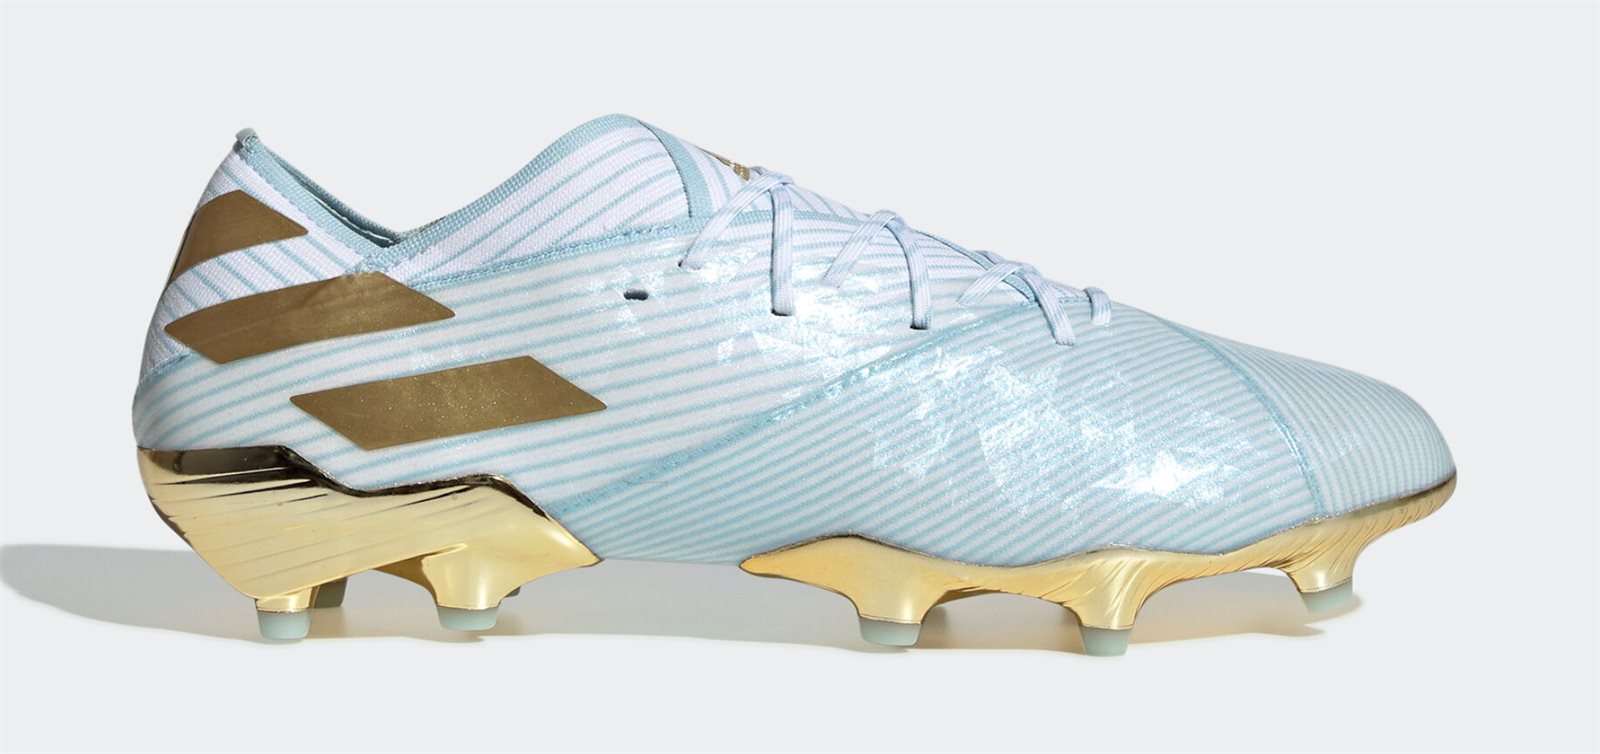 messi soccer cleats 2019